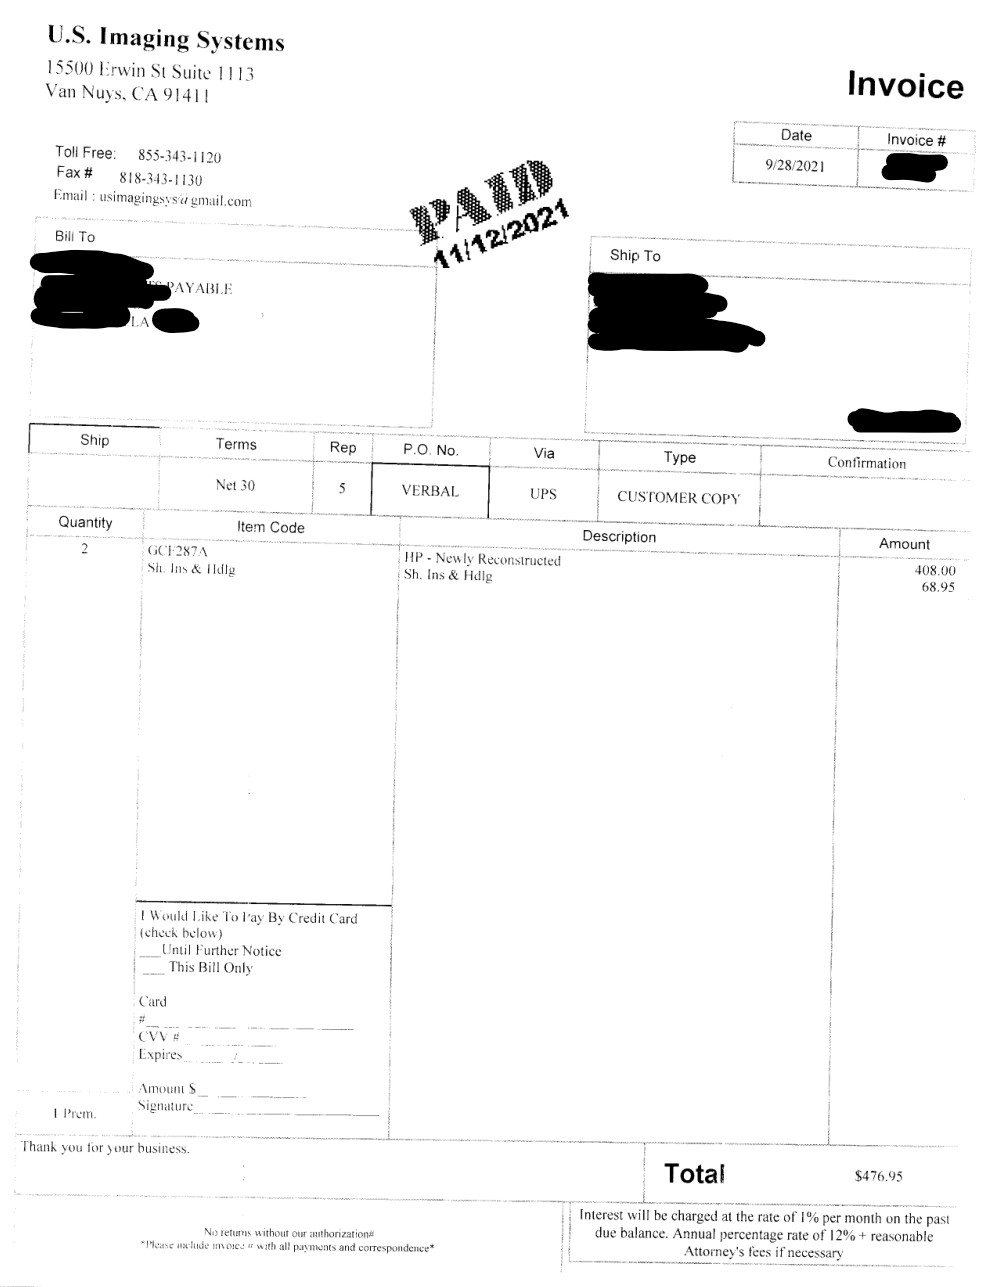 My paid invoice, note the charges and foot note.